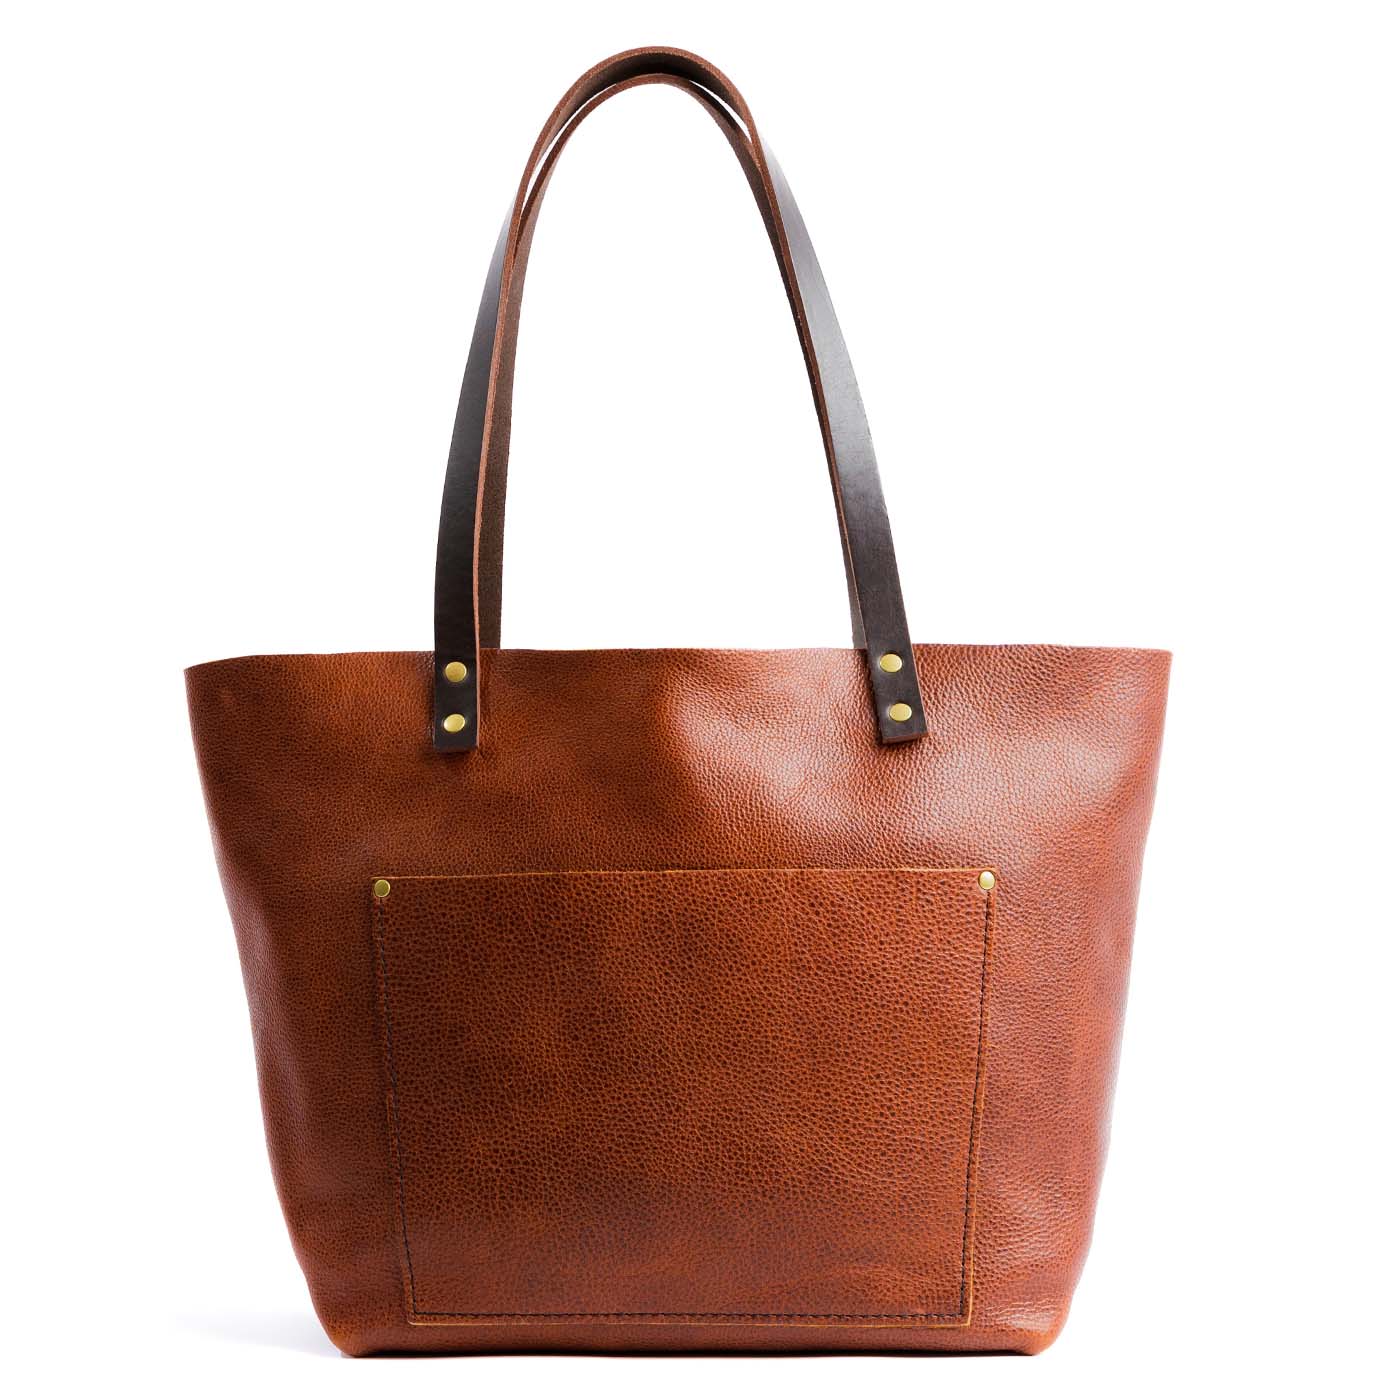 Fore Street Tote Bag, Leather Tote